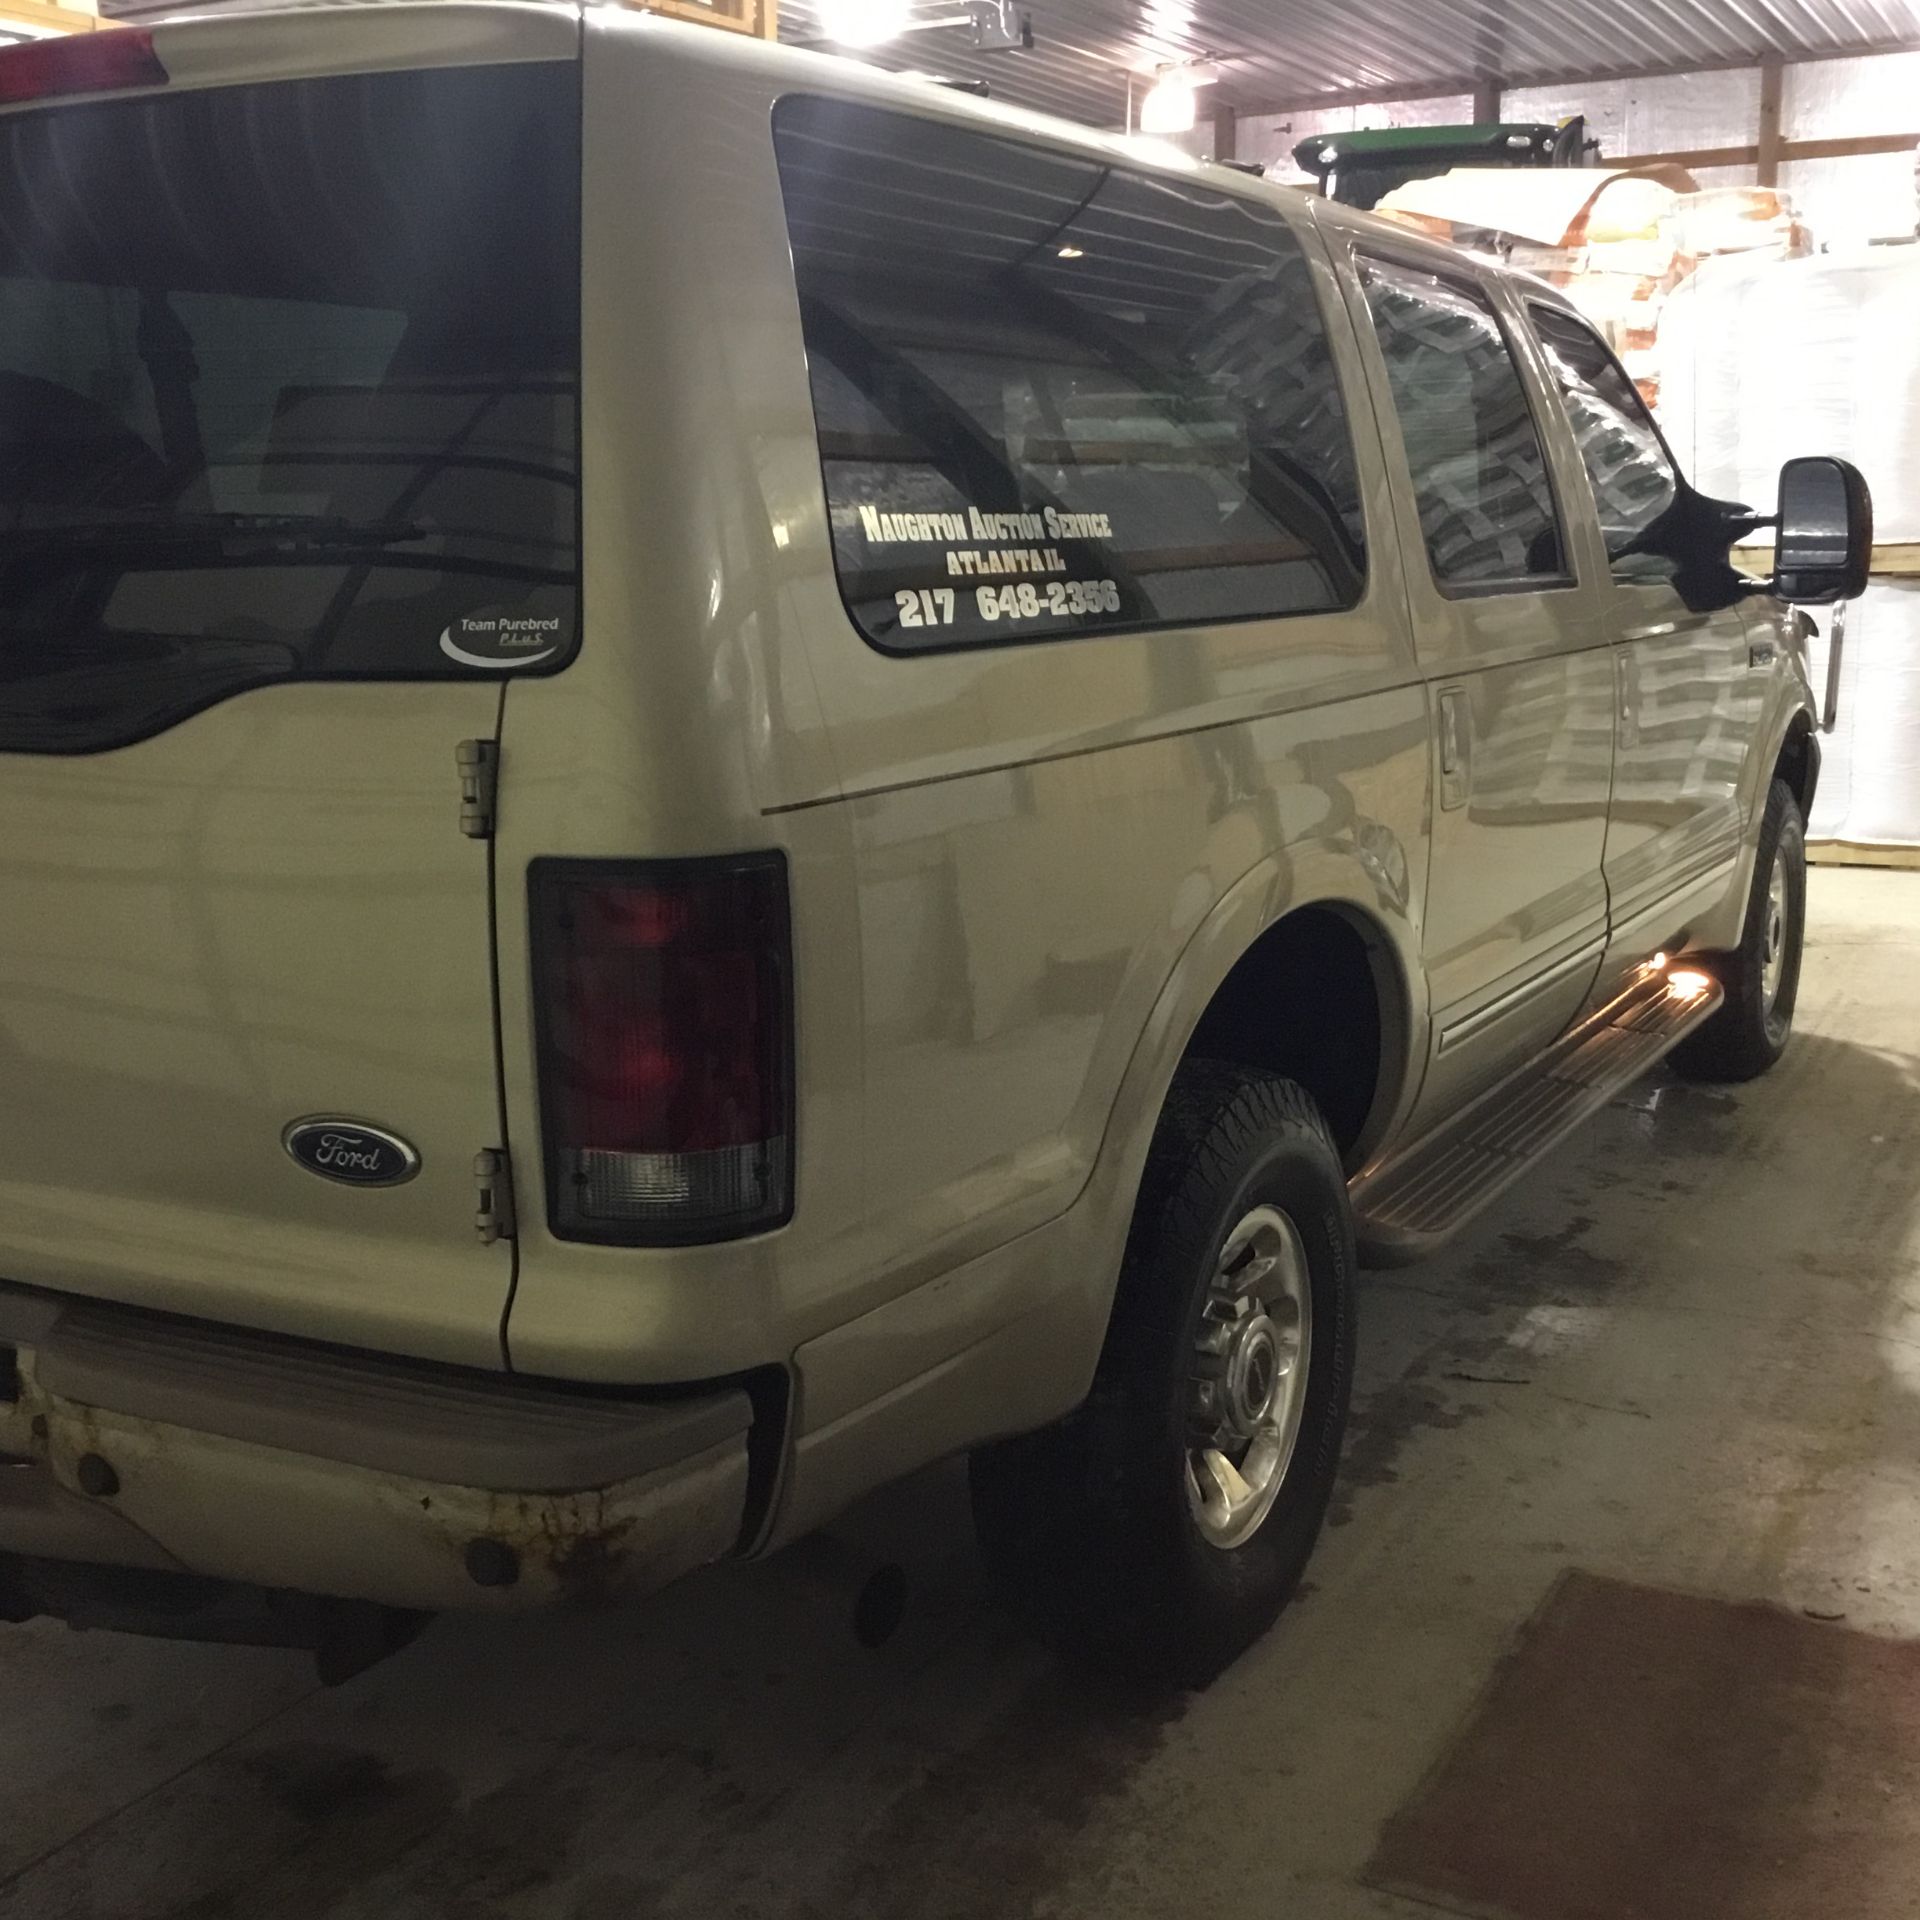 2004 Ford Excursion Limited, 6.0 Diesel, 4x4, 205,000 Miles, Vin 1C4NJPBB2HD103824, Tan, Good - Image 2 of 12